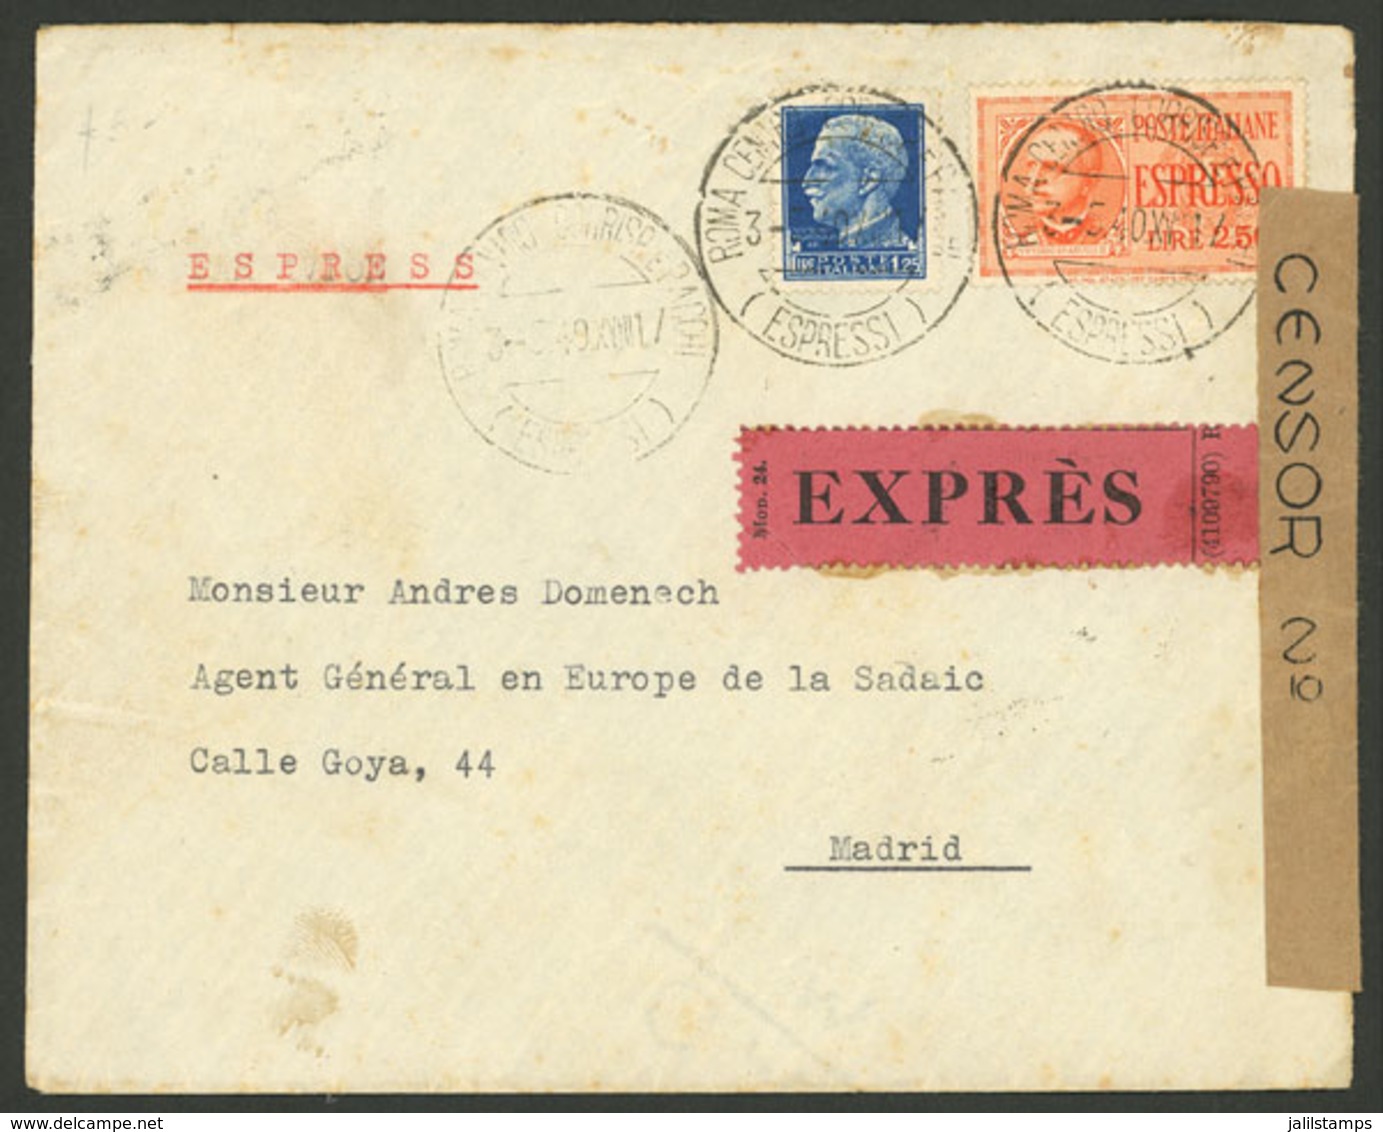 ITALY: 3/MAY/1940 Roma - Madrid, Express Cover Franked With 1.25L. For Regular Postage + 2.50L. For The Express Fee, Wit - Non Classificati